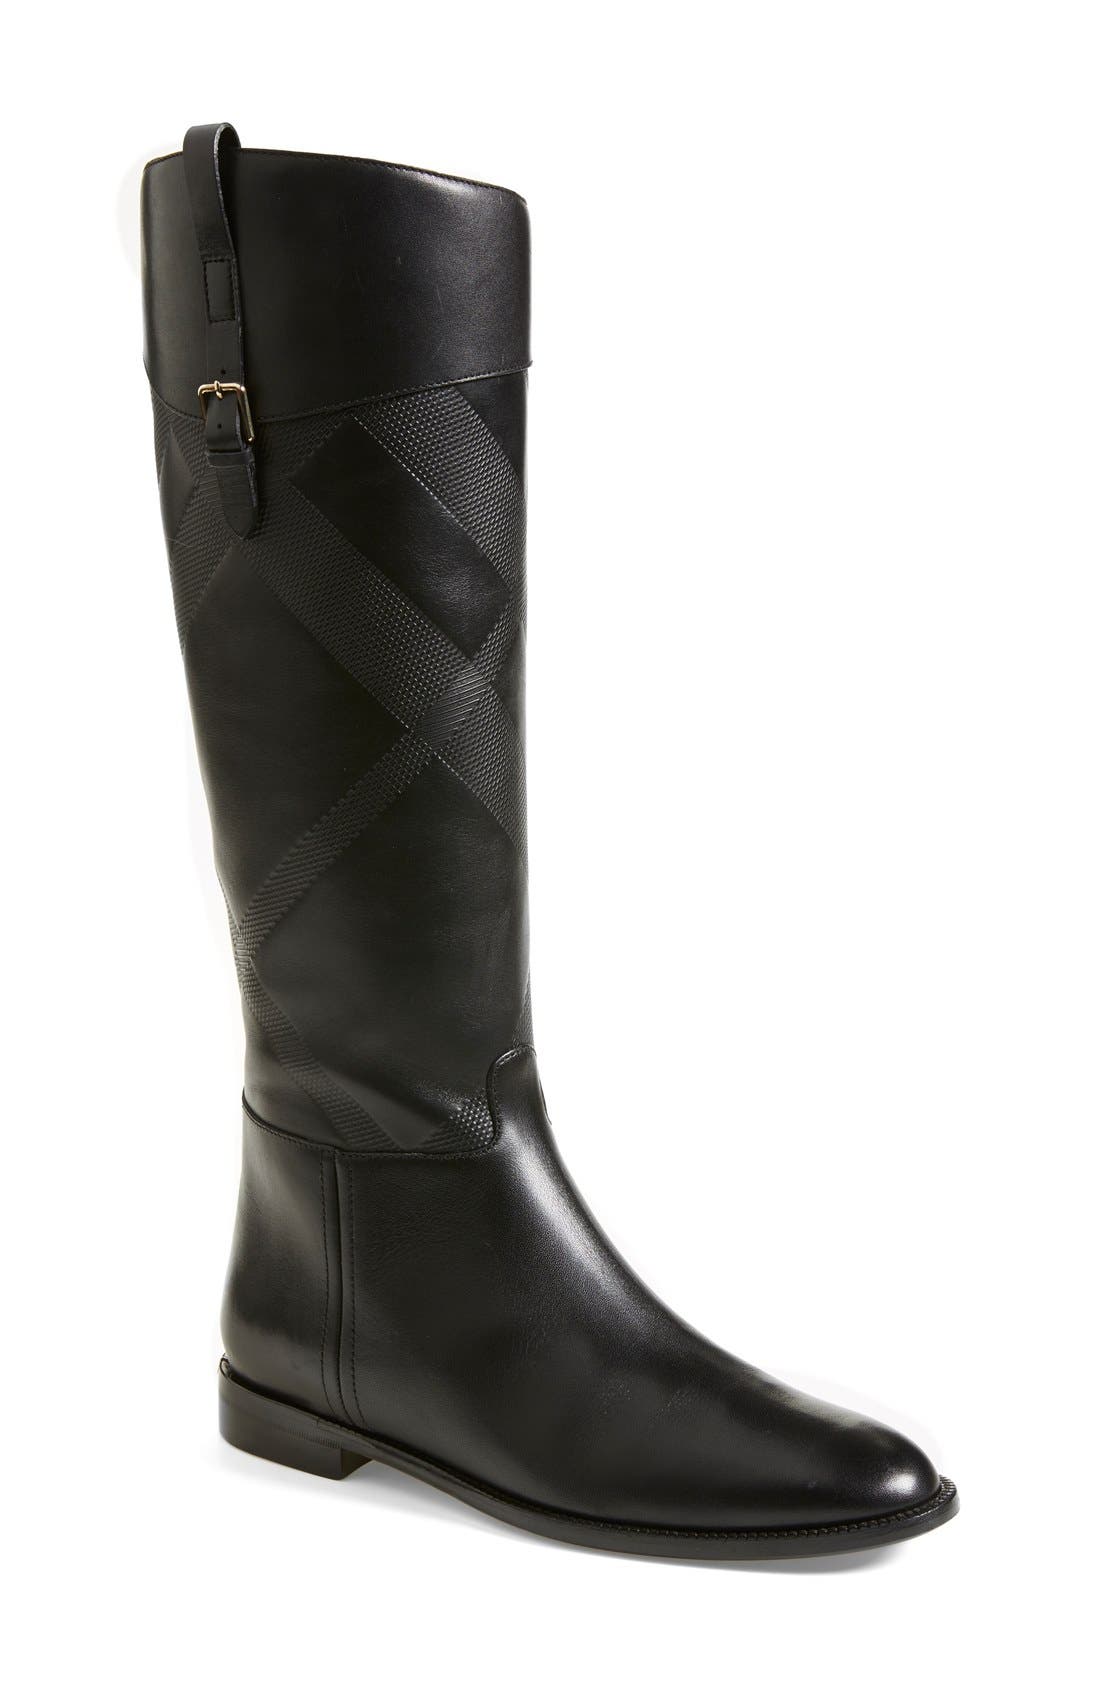 burberry riding boots